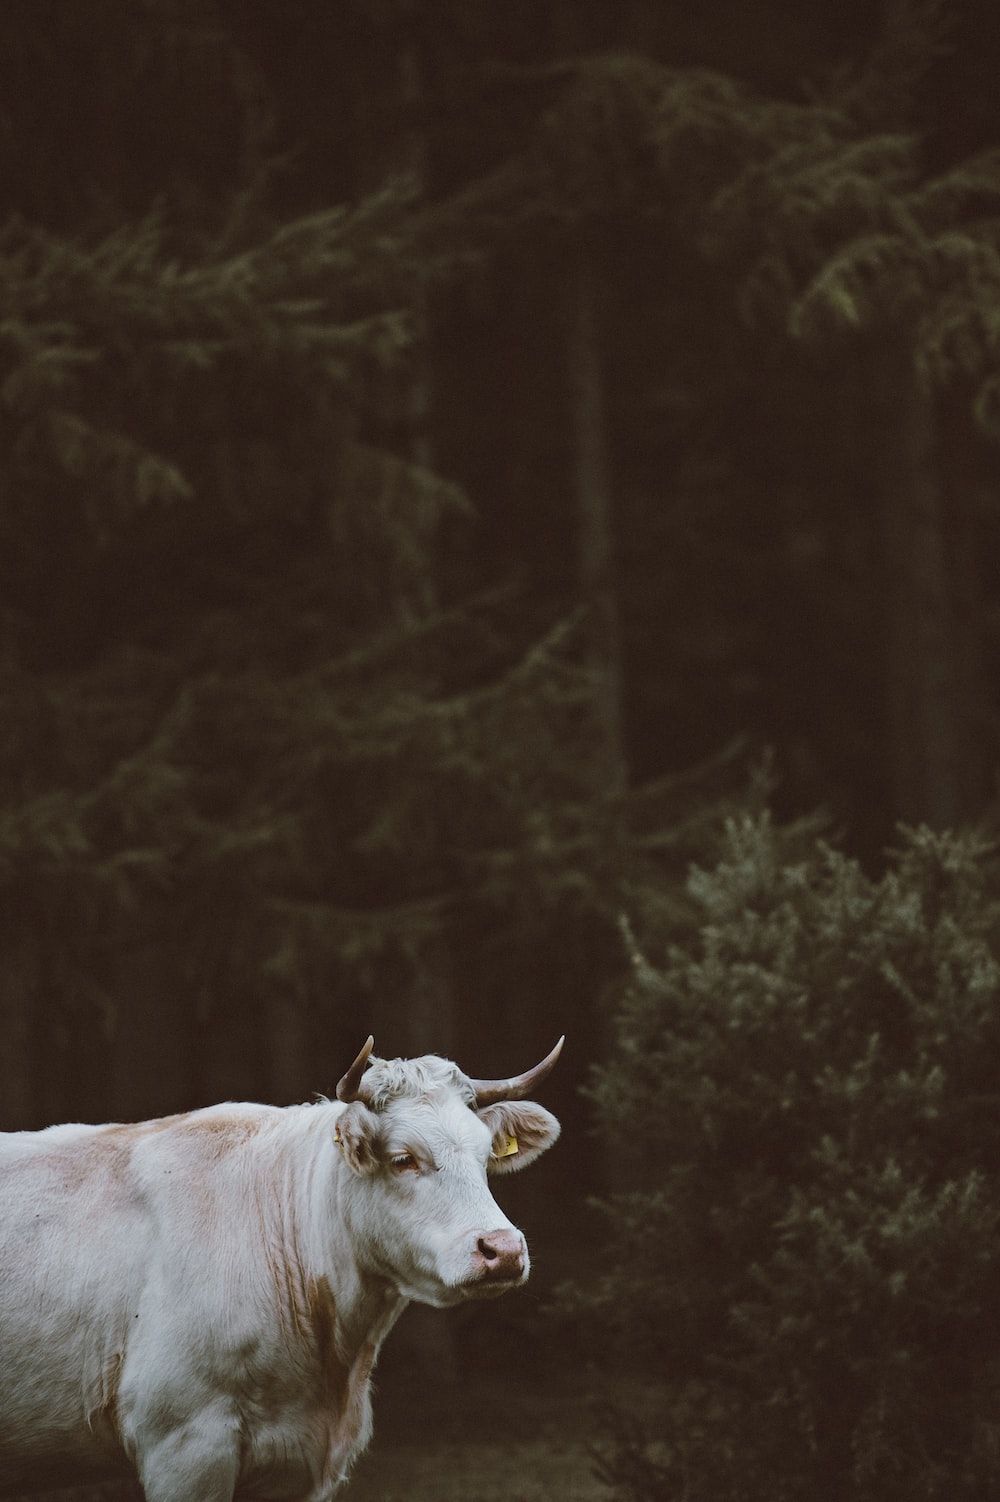 White Cow Picture. Download Free Image